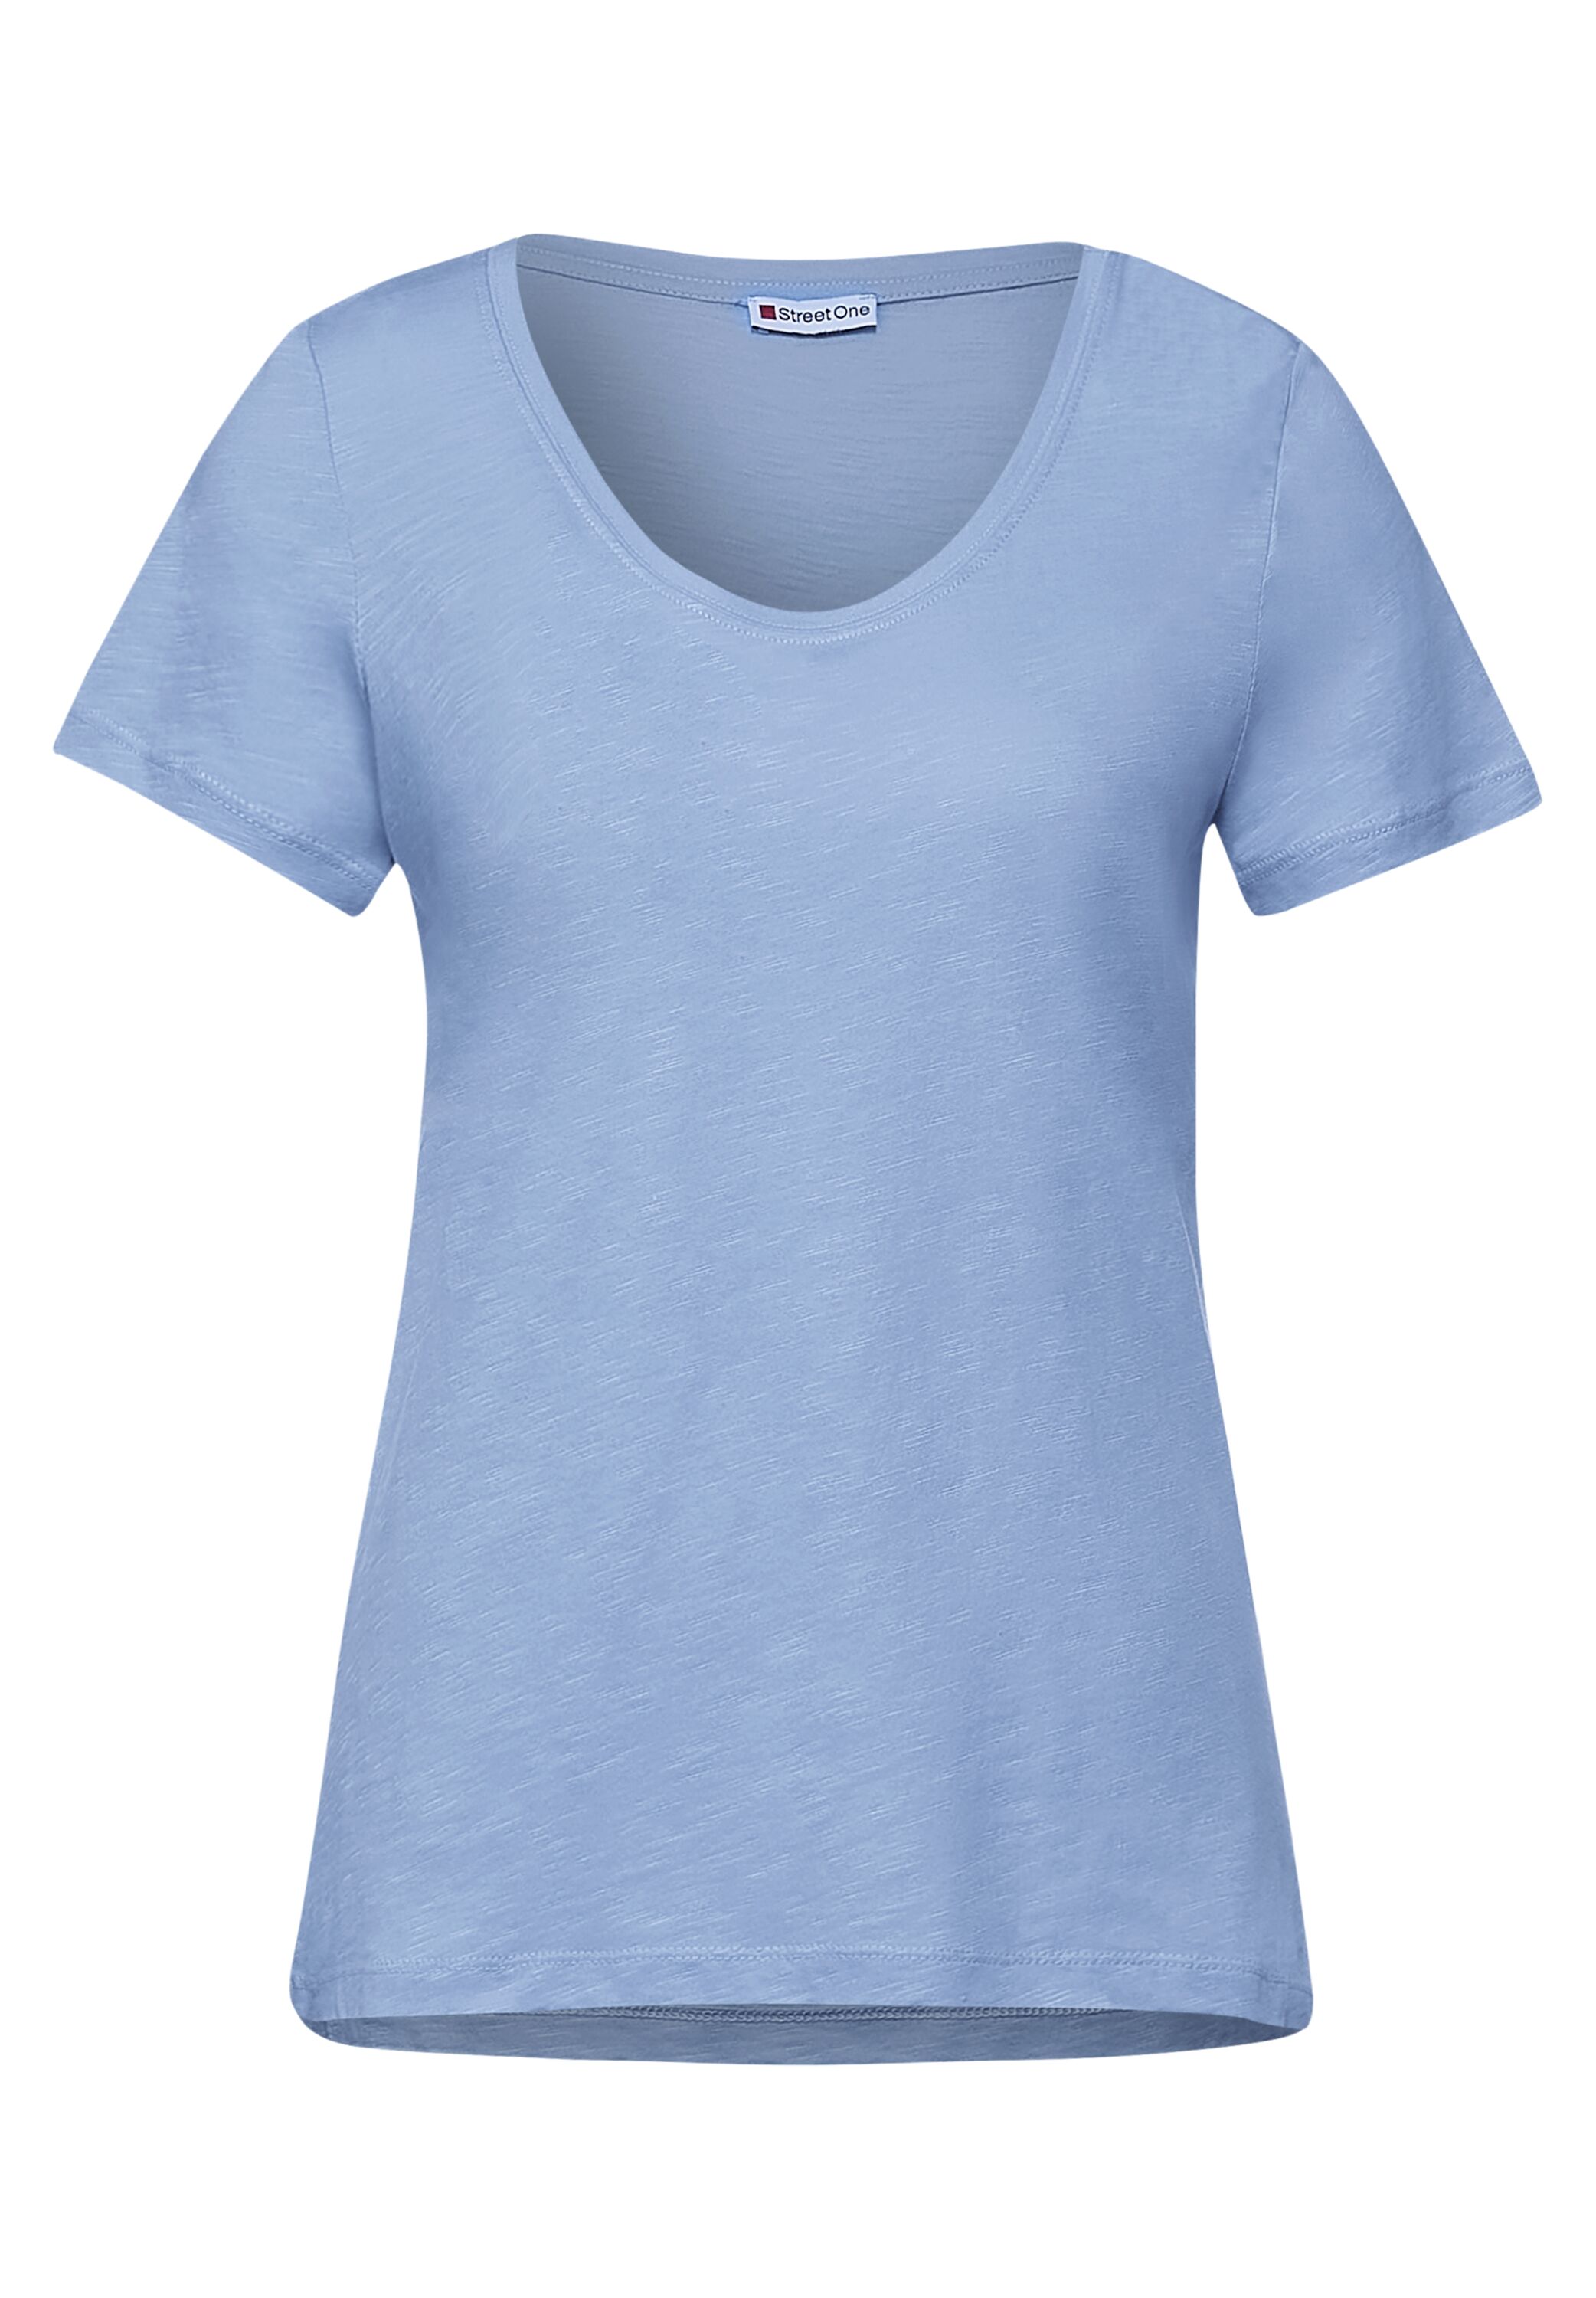 Street One T-Shirt Gerda in CONCEPT Mode Blue A316300-13032 Sunny Mid 